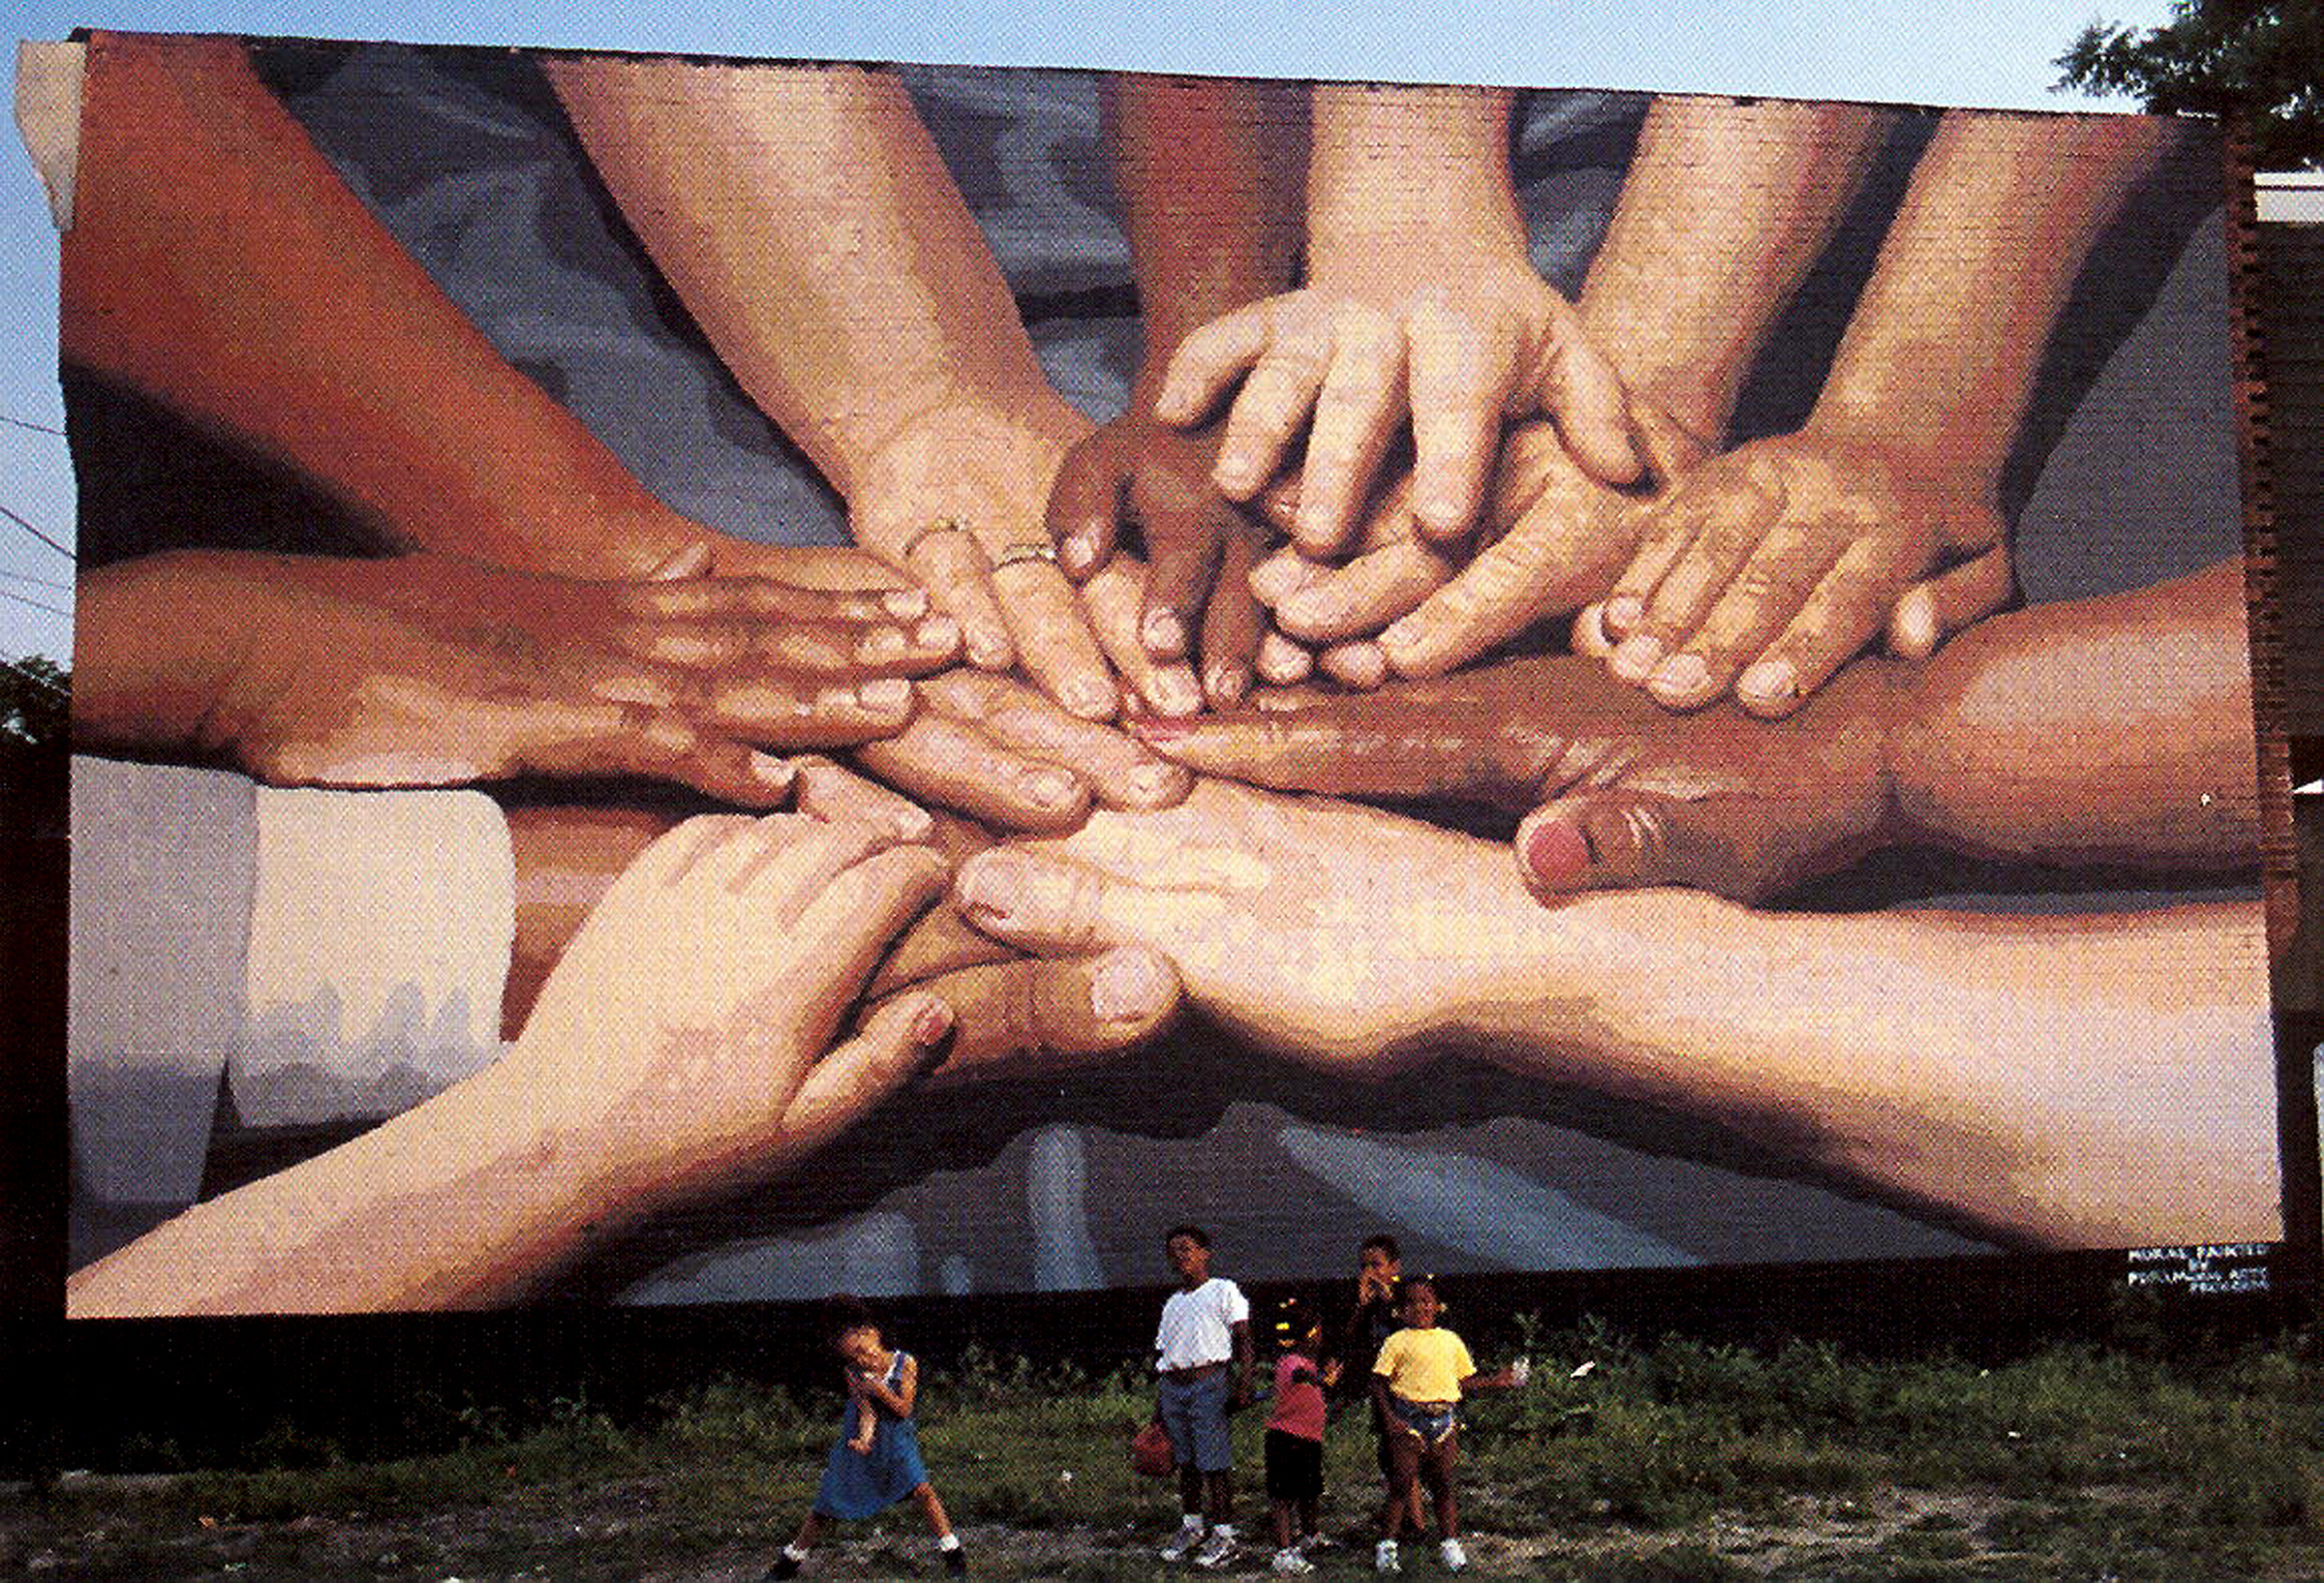 Peace Wall mural by Jane Golden and Peter Pagast, photo by PHLCVB